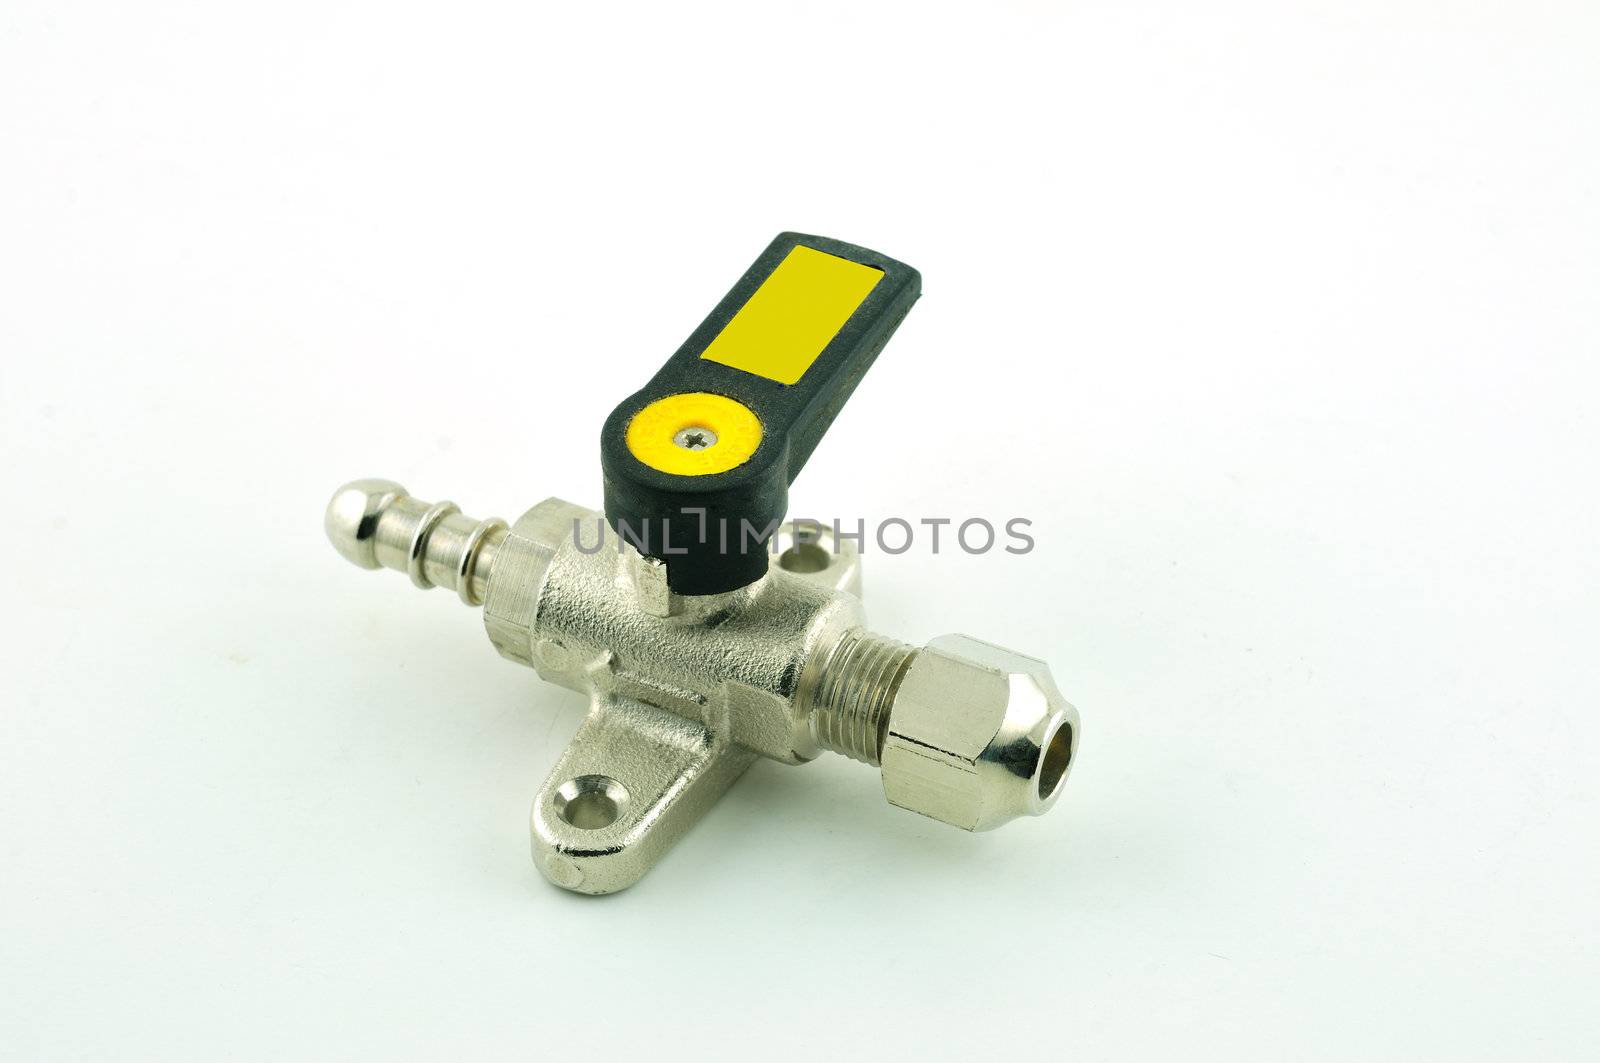 Tap for domestic gas with plastic handle photographed against a white background